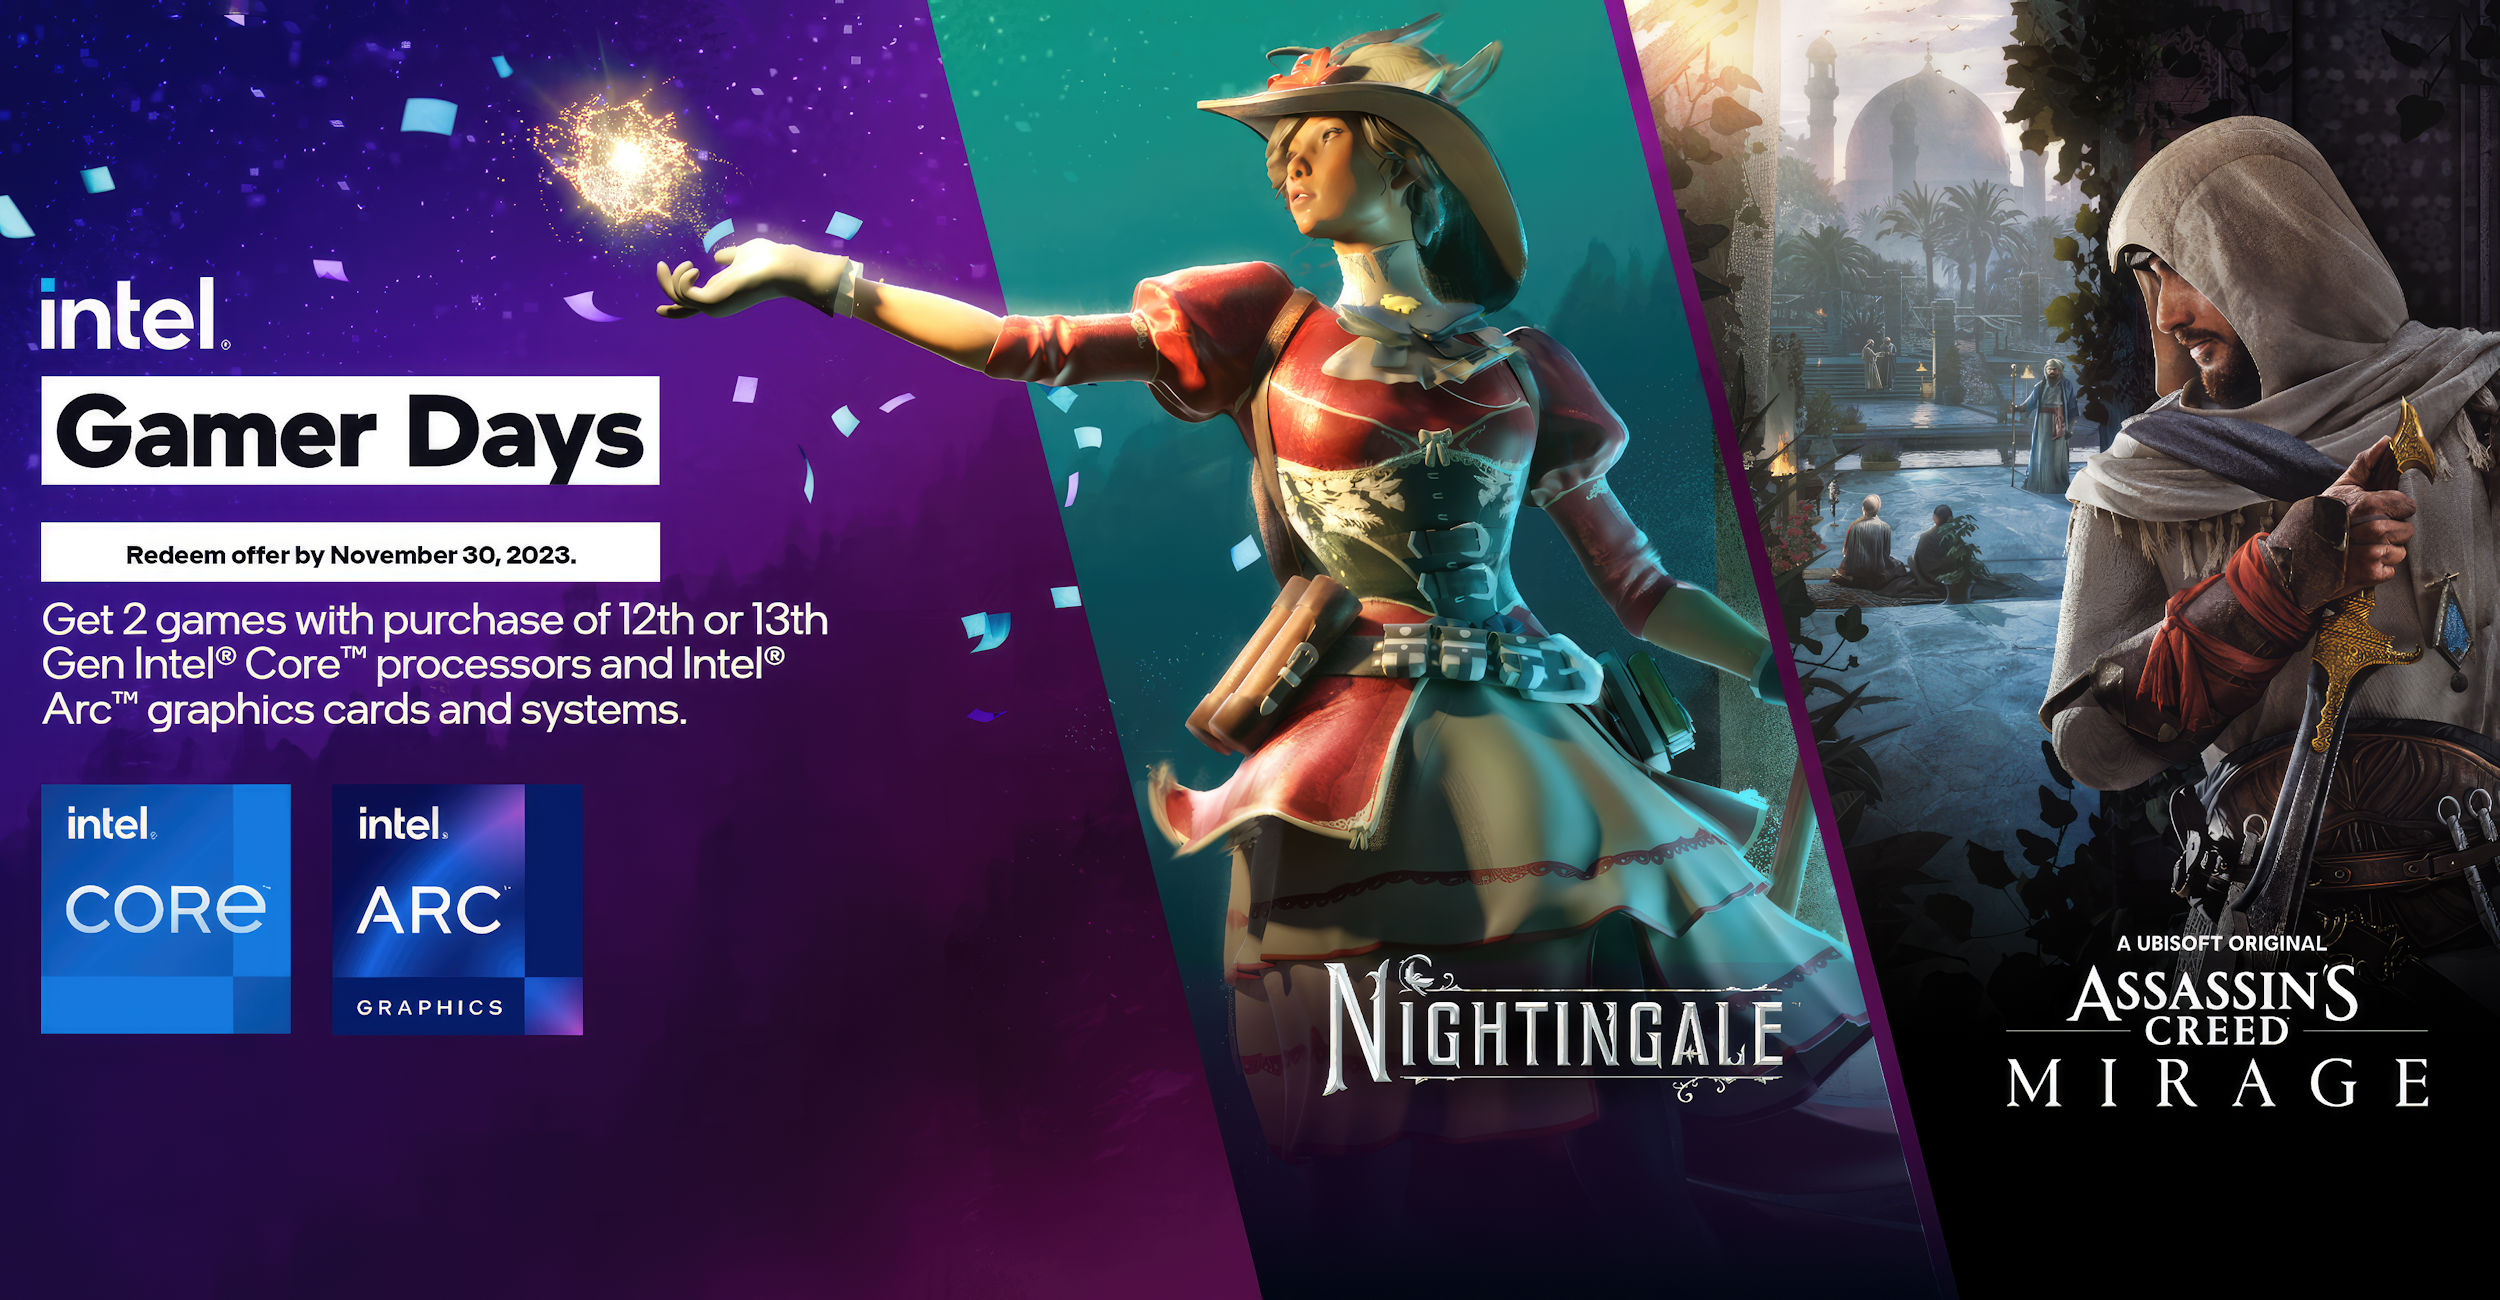 Intel to give away Assassin’s Creed Mirage and Nightingale with purchase of 12/13th Gen Core CPUs and Arc GPUs – VideoCardz.com